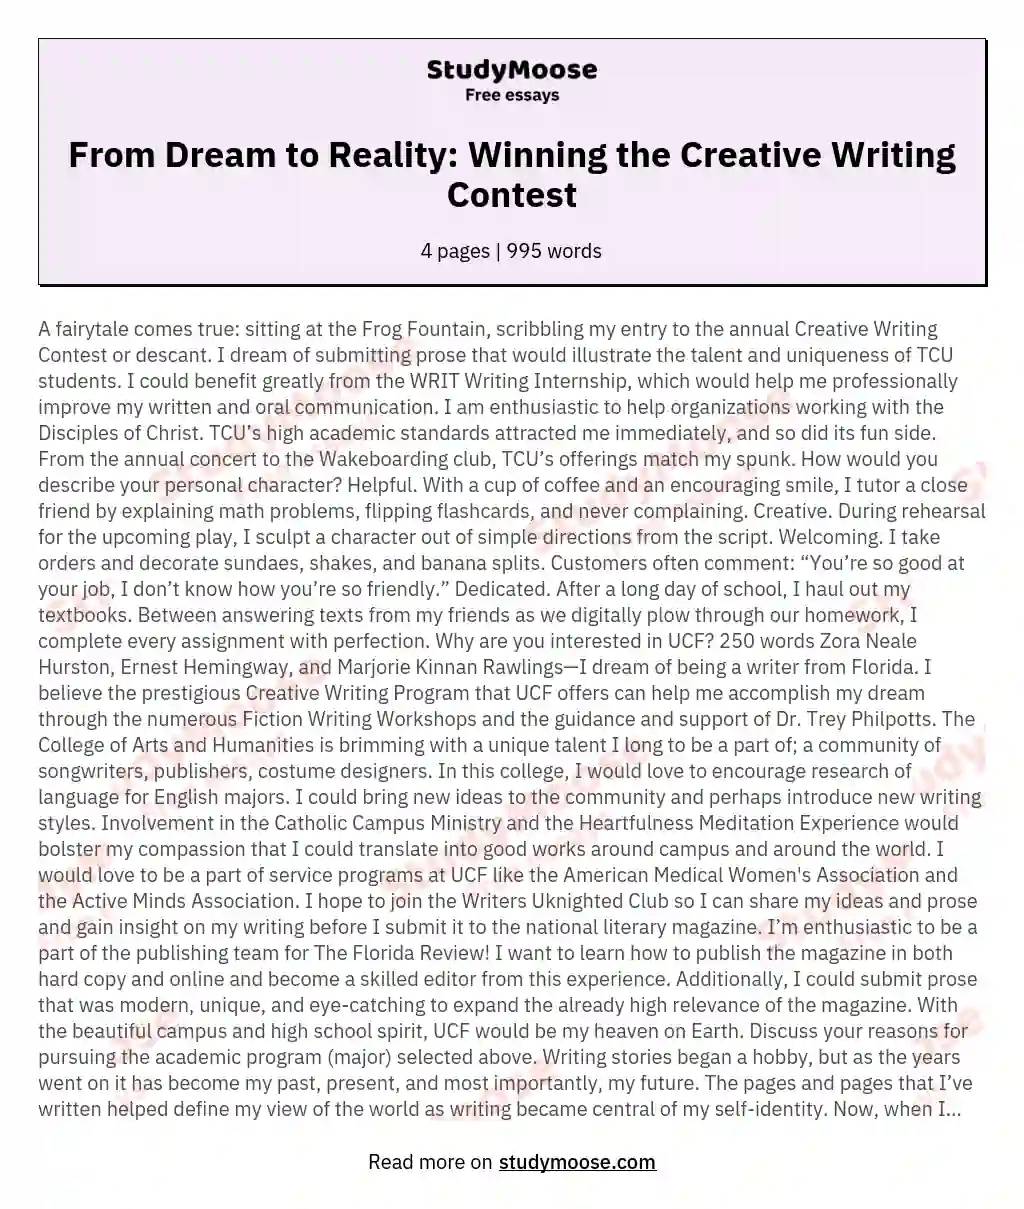 From Dream to Reality: Winning the Creative Writing Contest essay